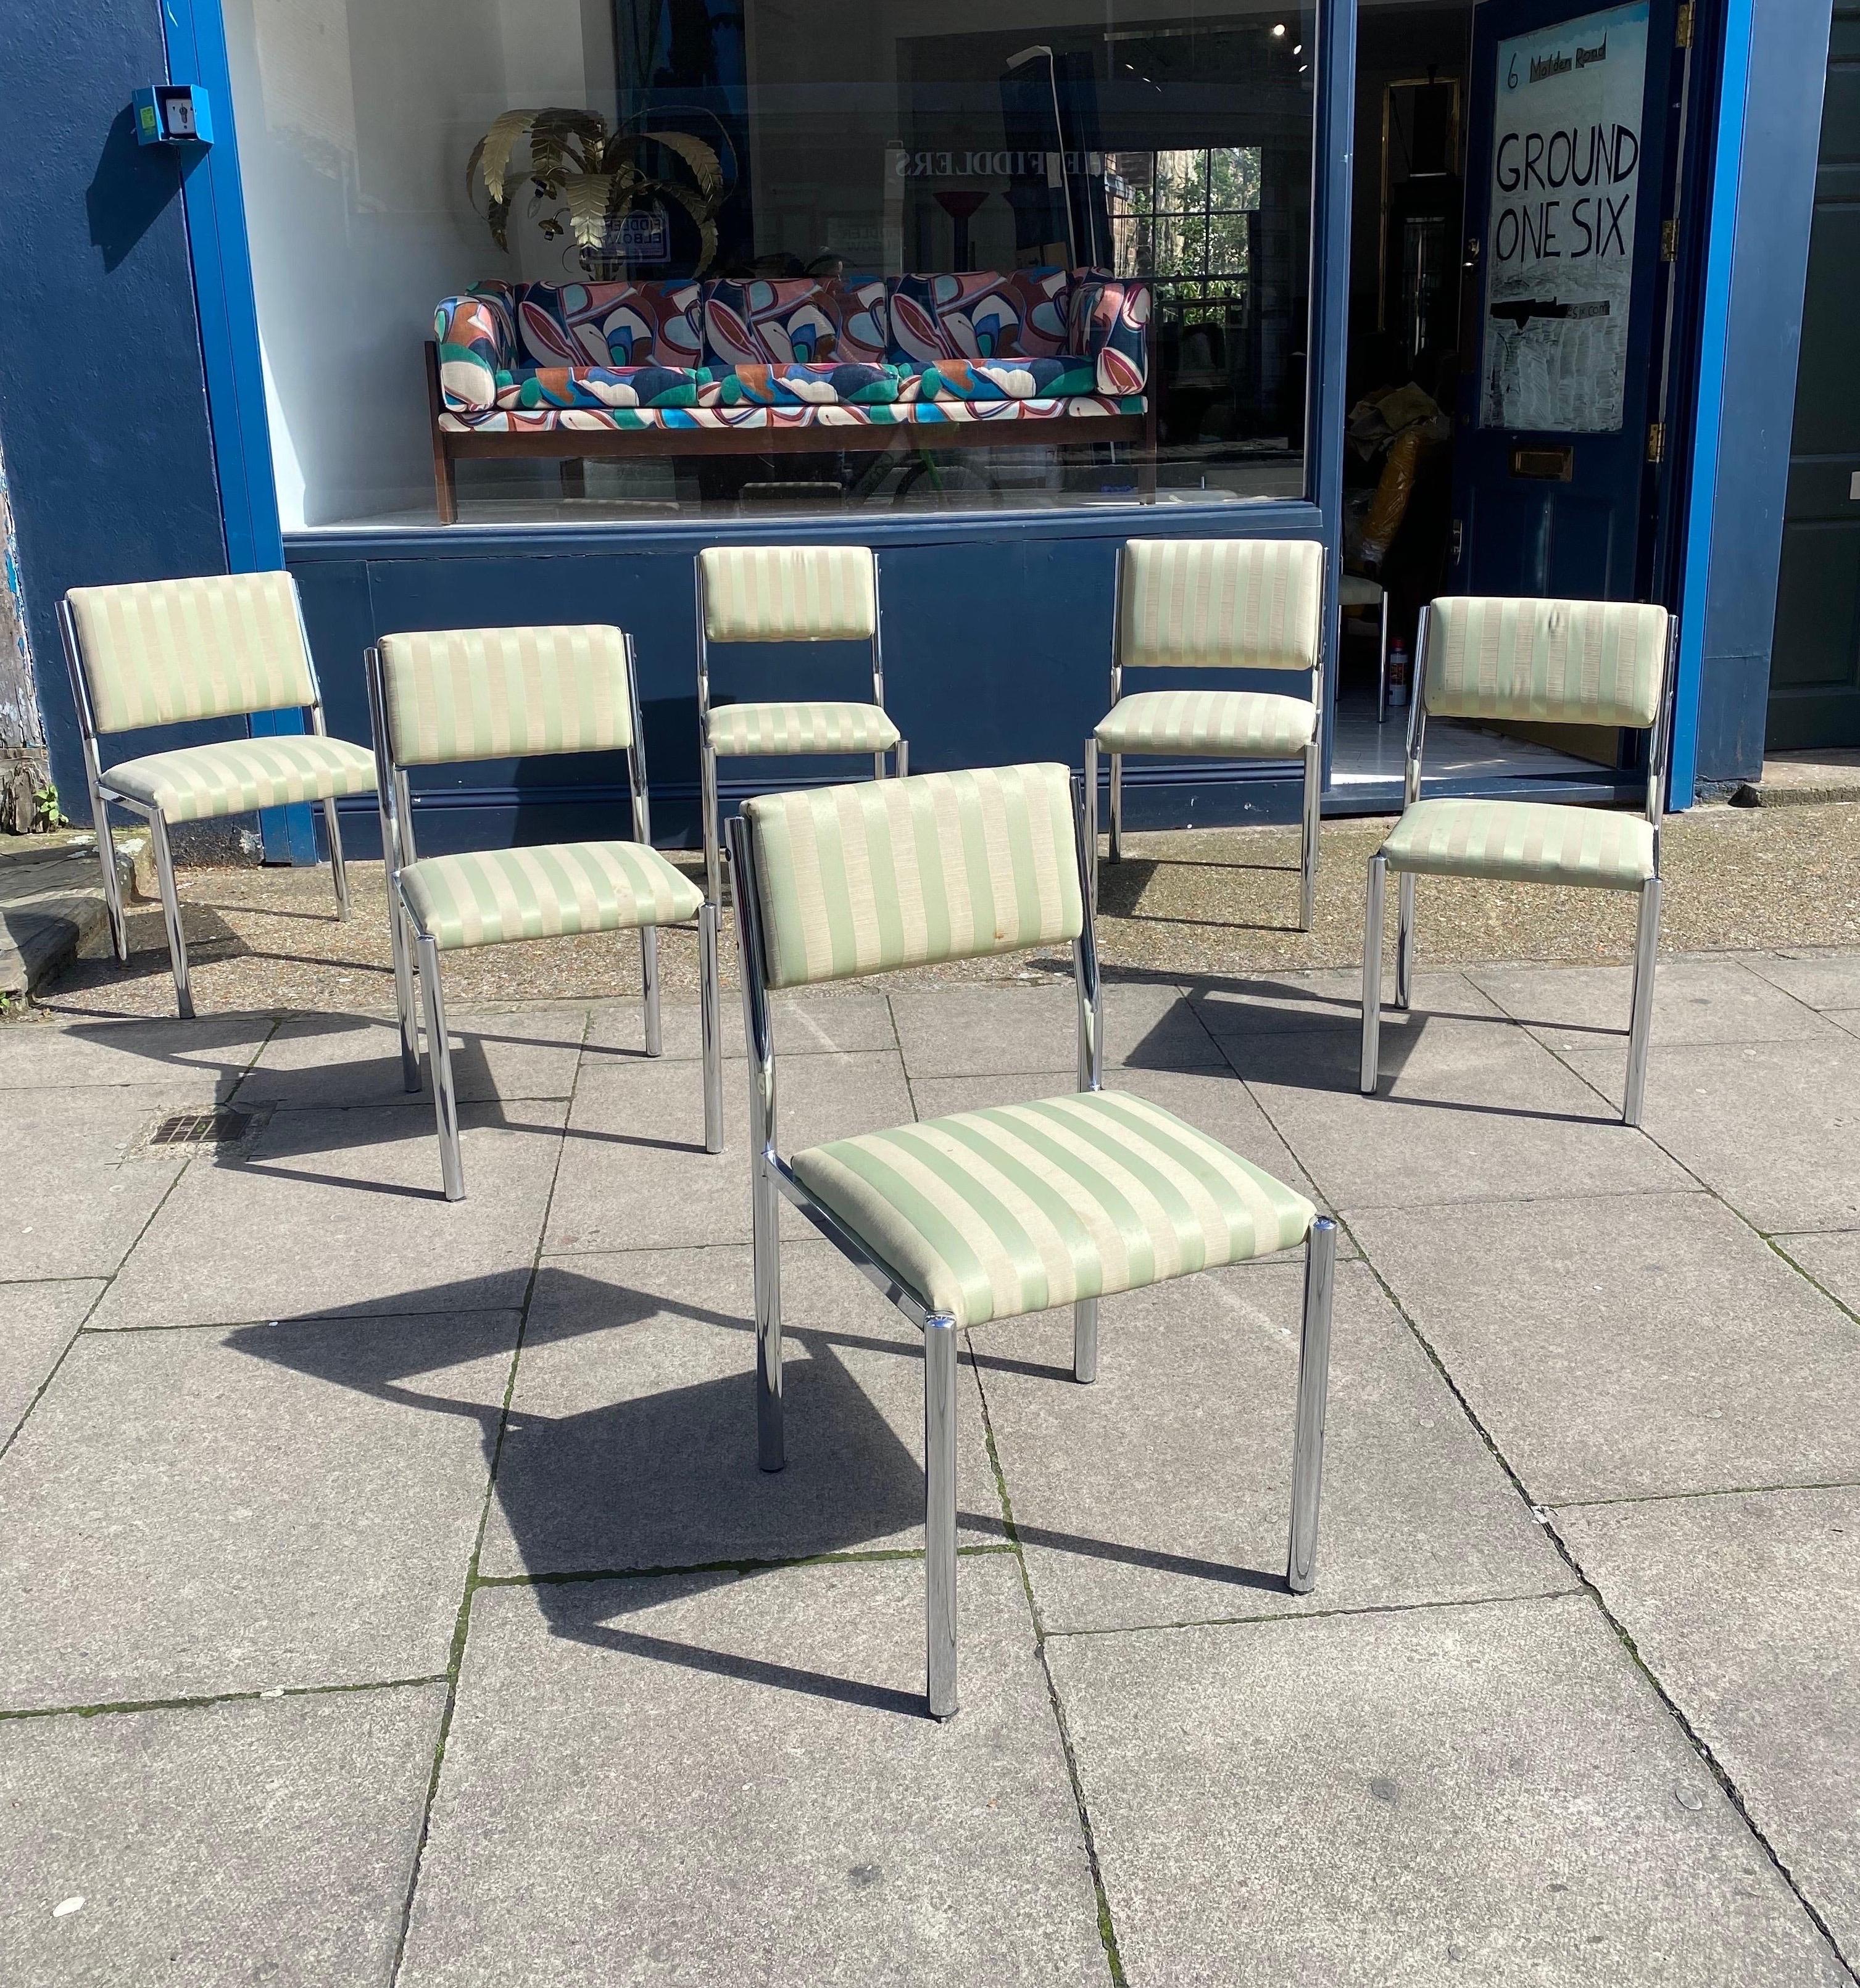 Italian chrome set of seven dining chairs in mint green satin cotton and chrome steel tubular frame. 
The back upholstery is covering both sides. 

Overall in good condition with some signs of wear but nothing serious. They are perfectly